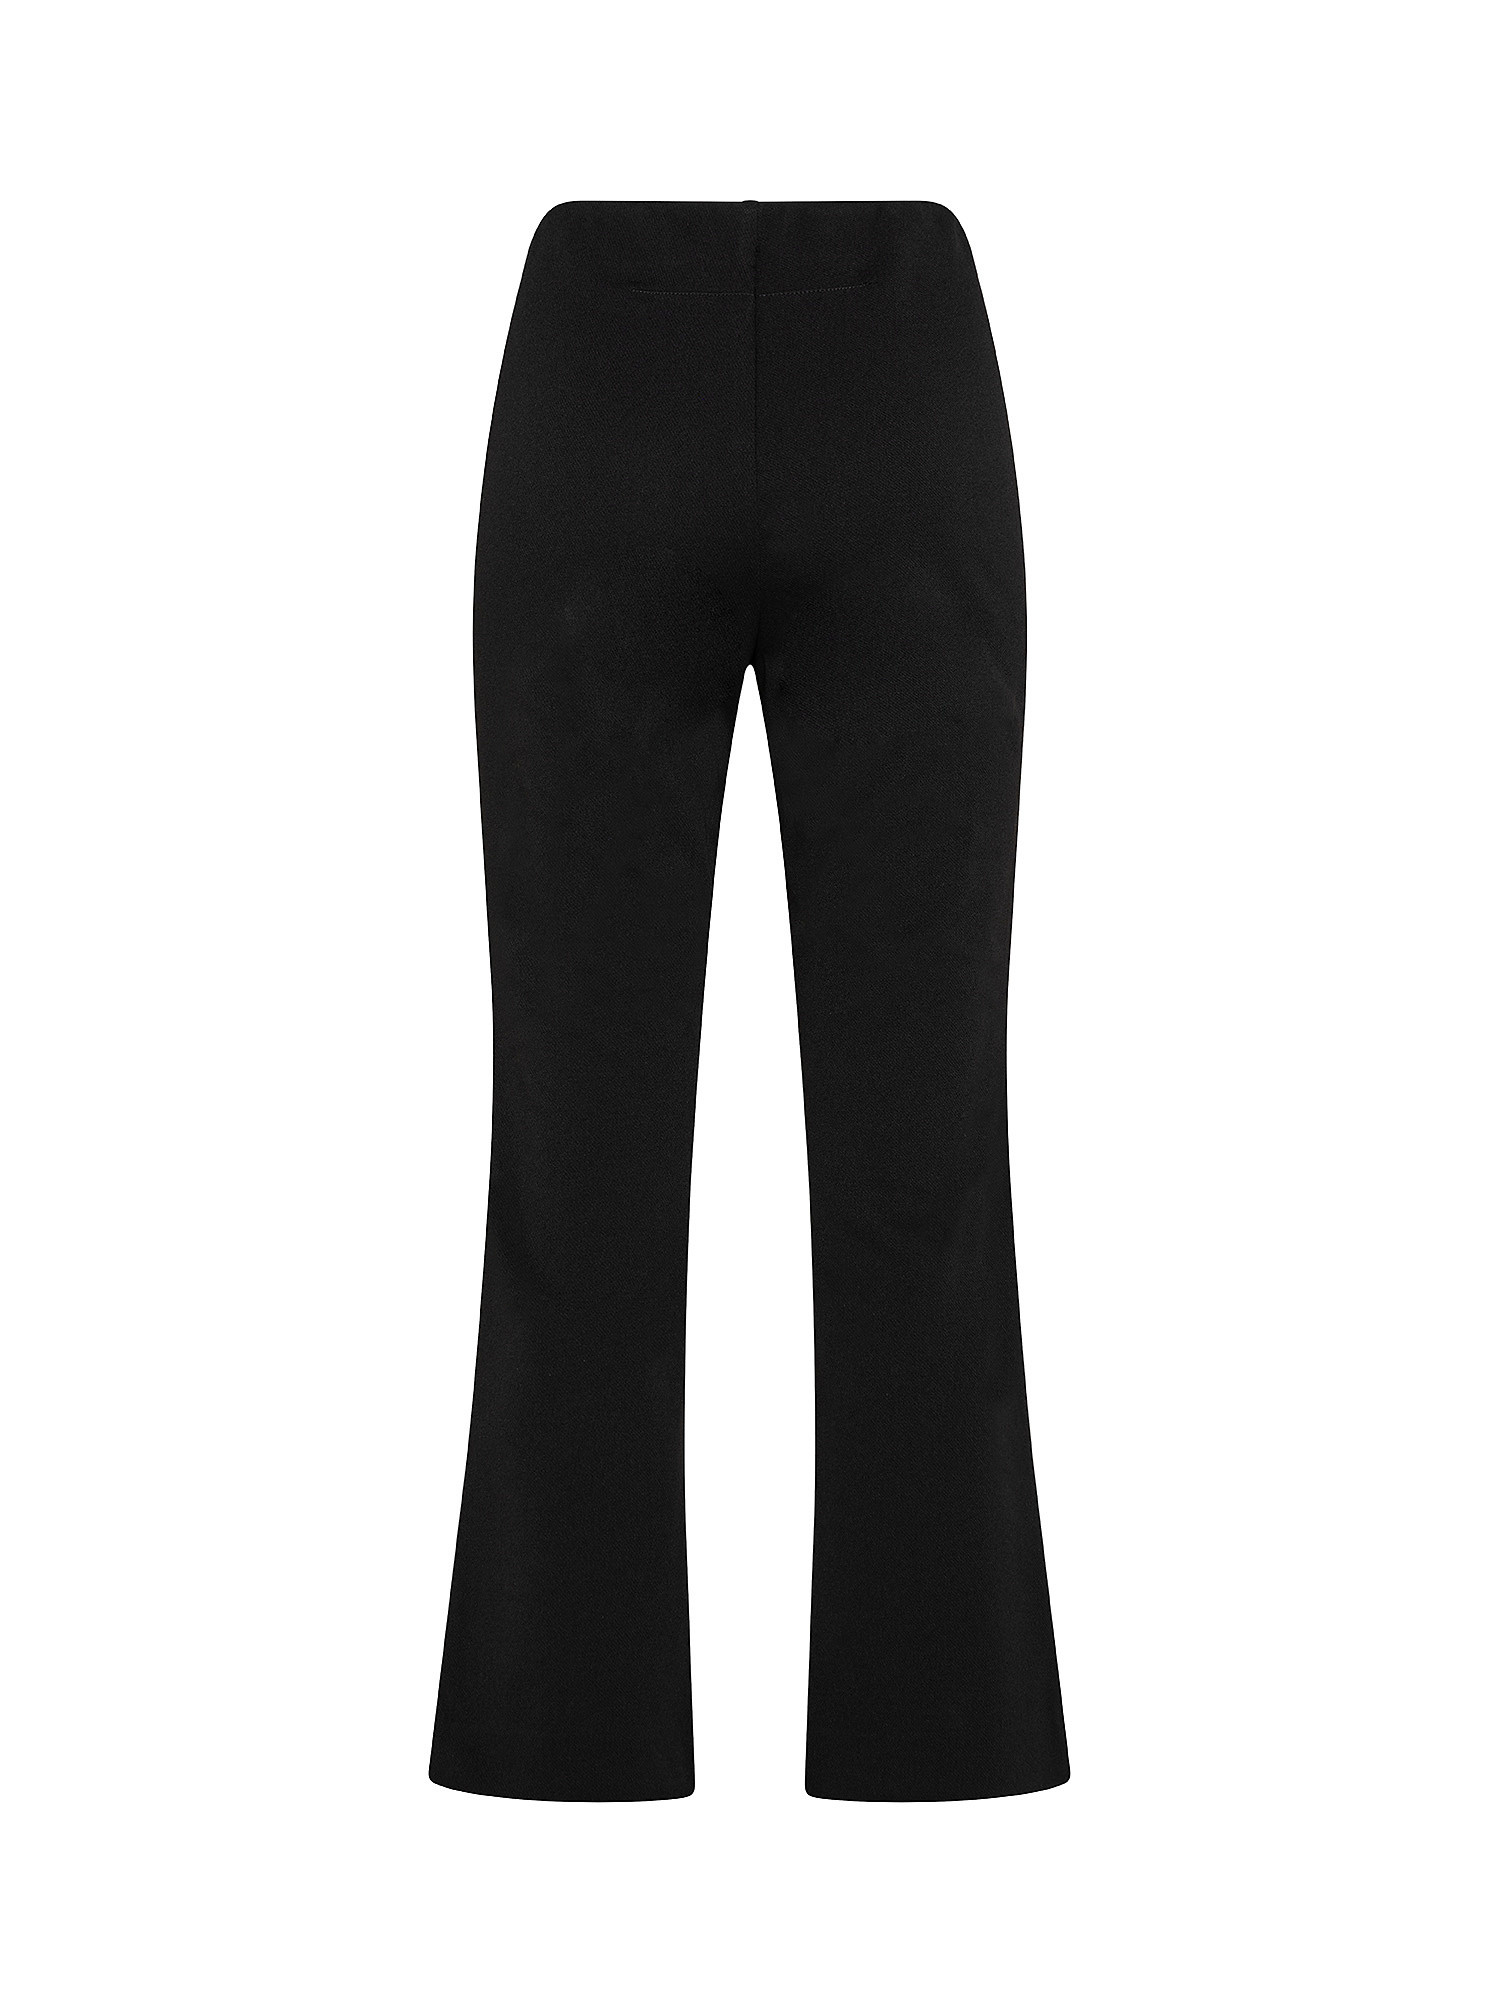 Flare trousers, Black, large image number 1